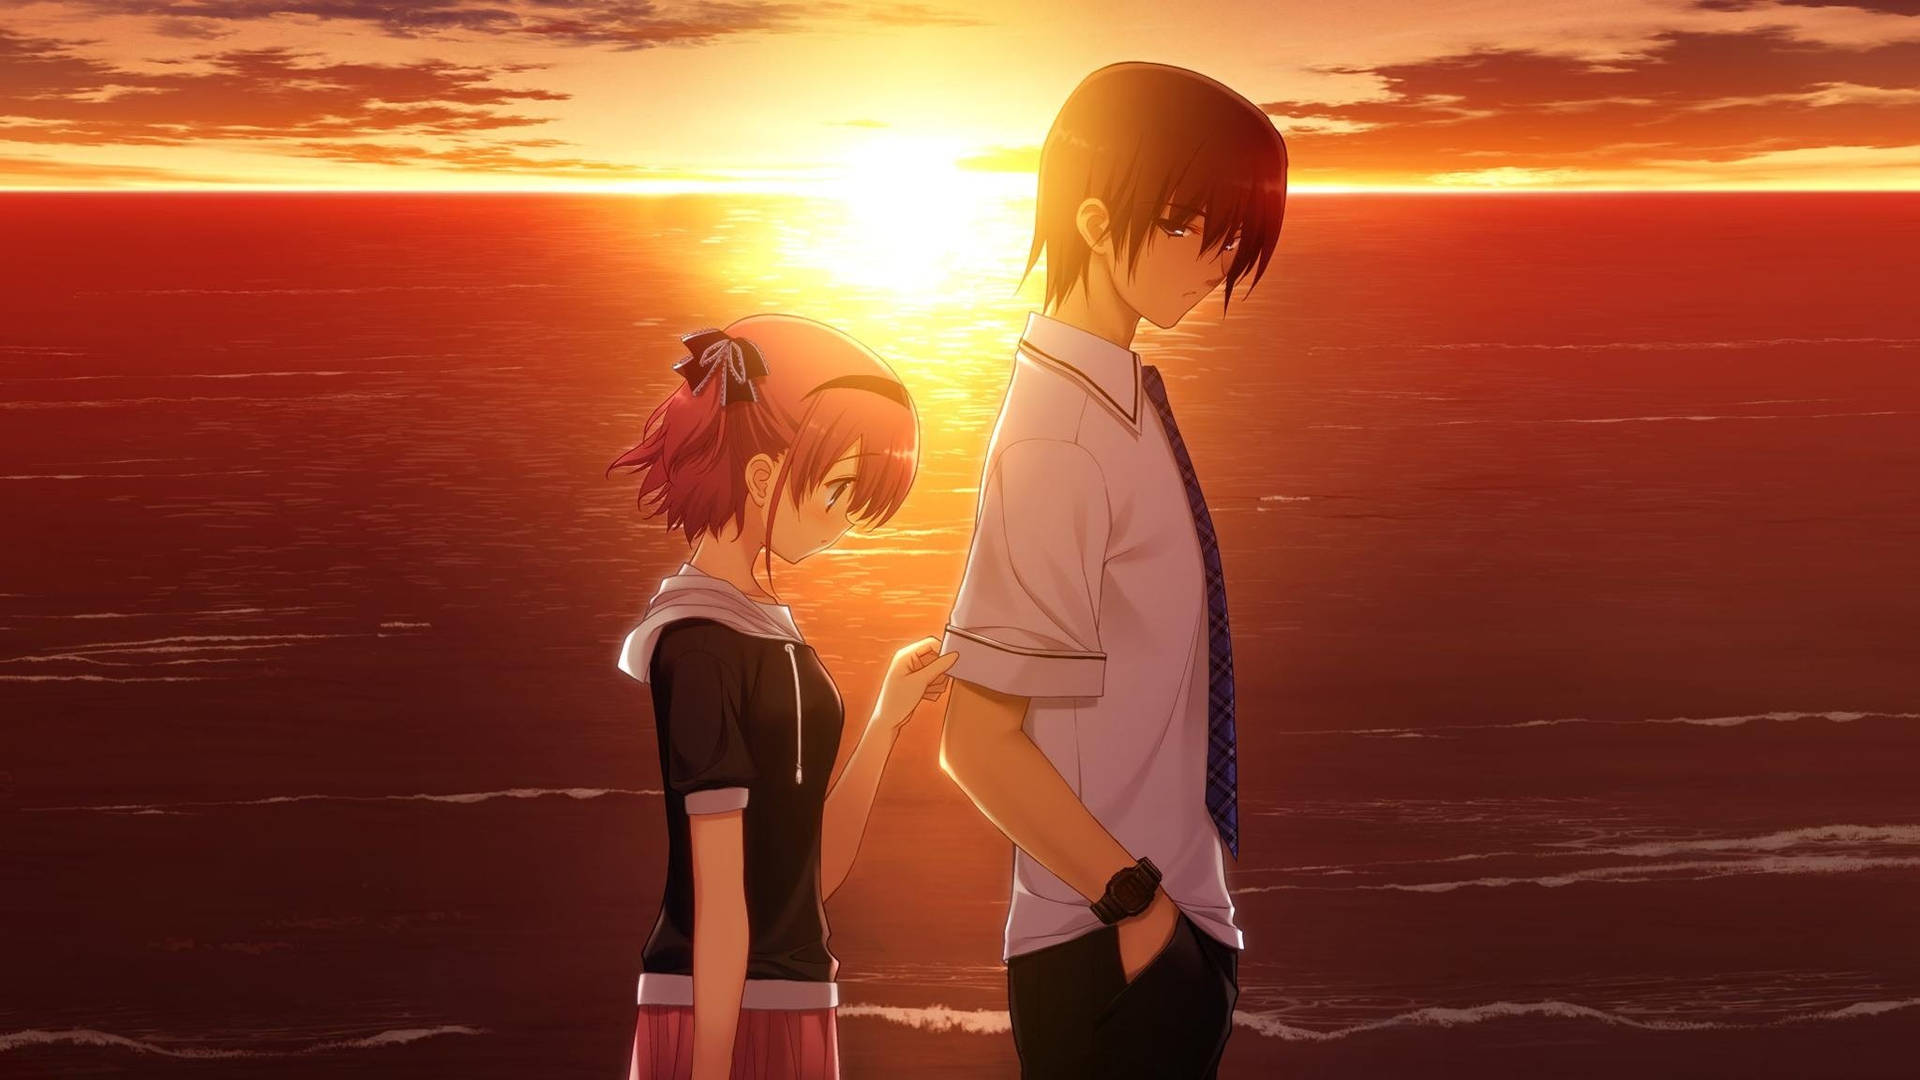 Cute Anime Couple Together At Sunset